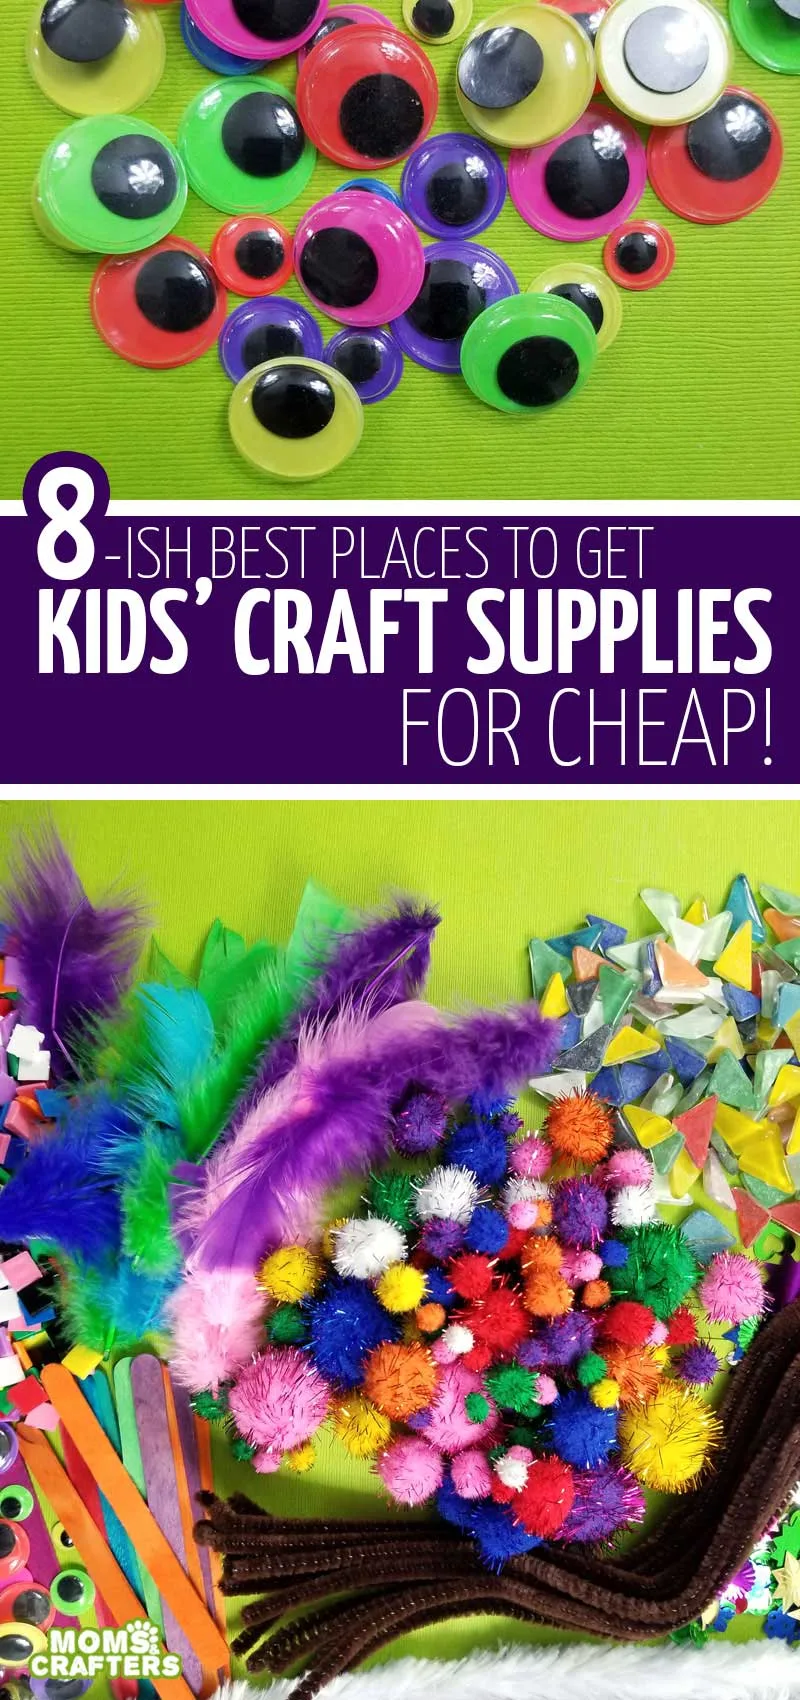 The best places to buy cheap kids art and craft supplies online - from someone who 's been crafting, researching, and price-checking for years!!